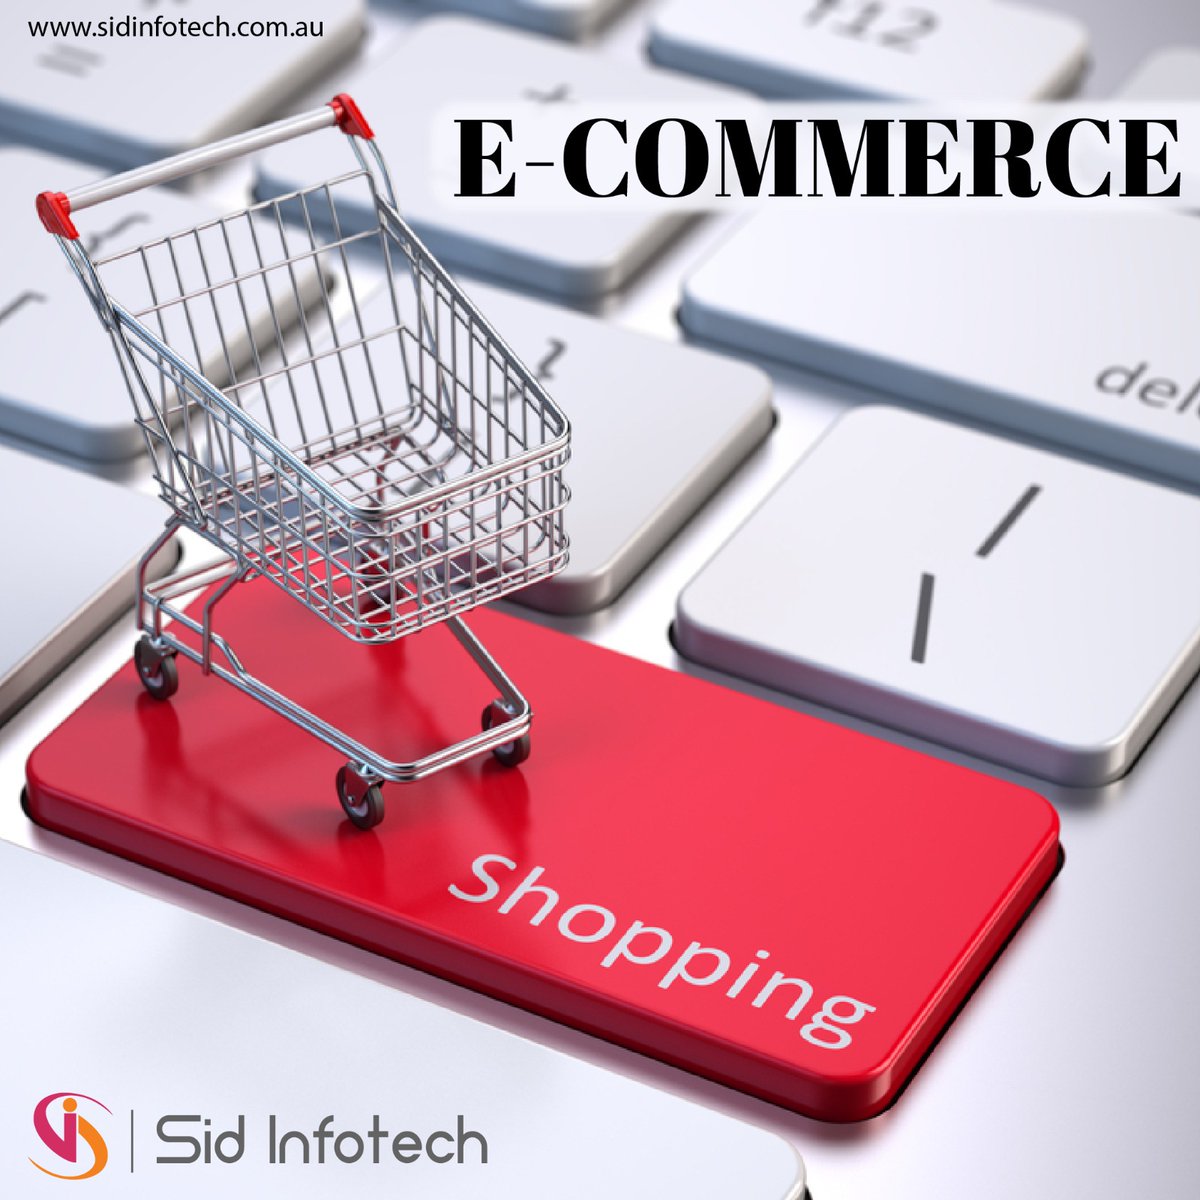 Open doors to unlimited online possibilities with our E-commerce website service. From stunning designs to secure payment gateways, we build a platform that showcases your products and boosts sales.  🛒💻
.
.
#ecommerceservices #sidinfotech #GlobalMarketplace